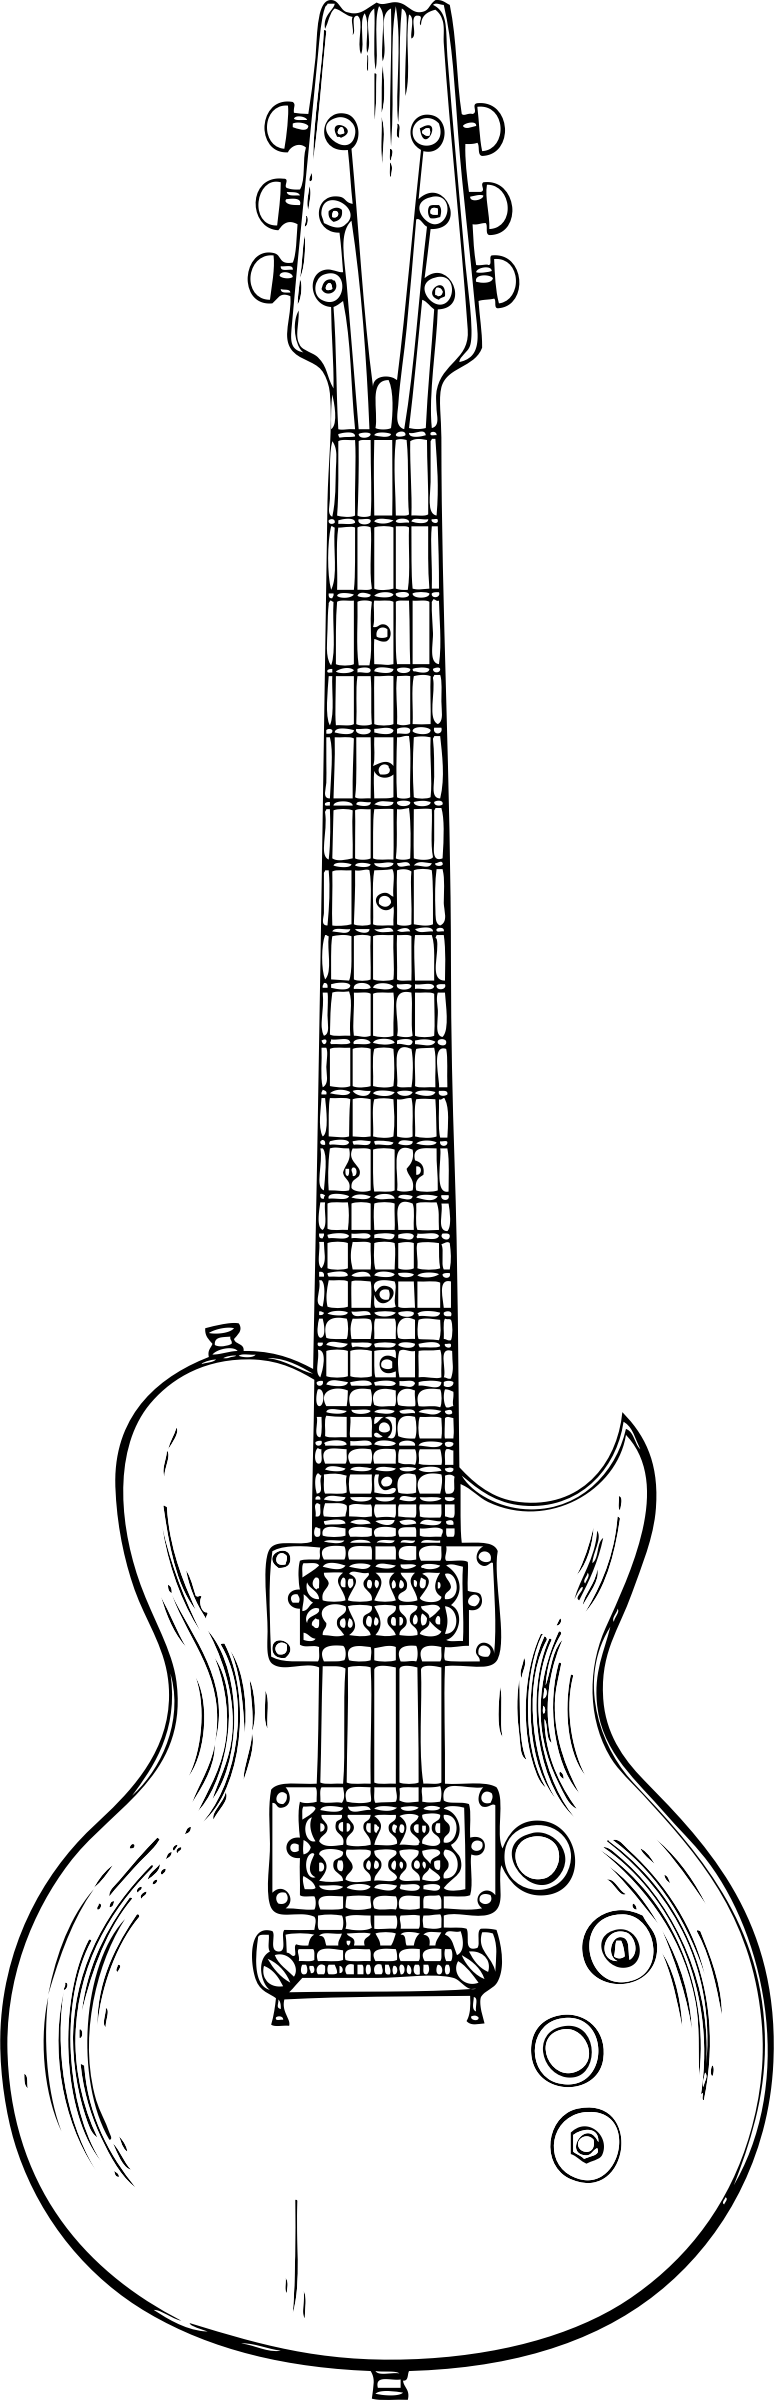 Electric Guitar Les Paul Gibson Drawing Clipart